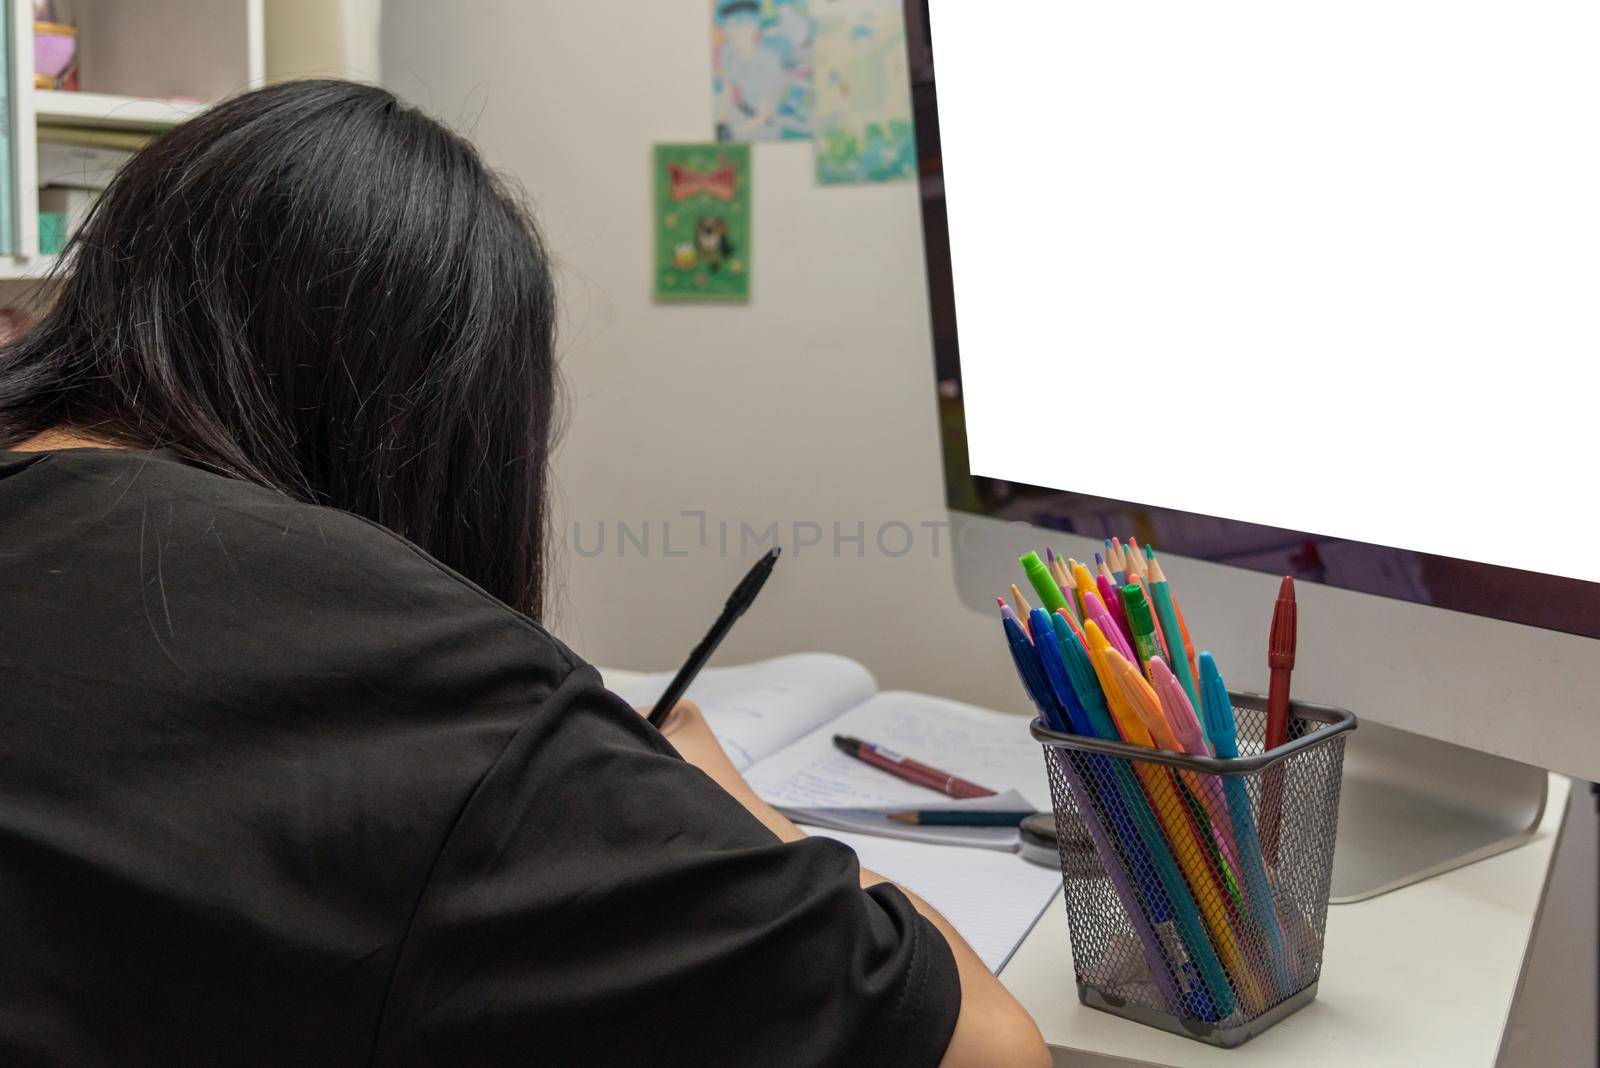 Asian student girl is writing homework and reading book at desk by aoo3771